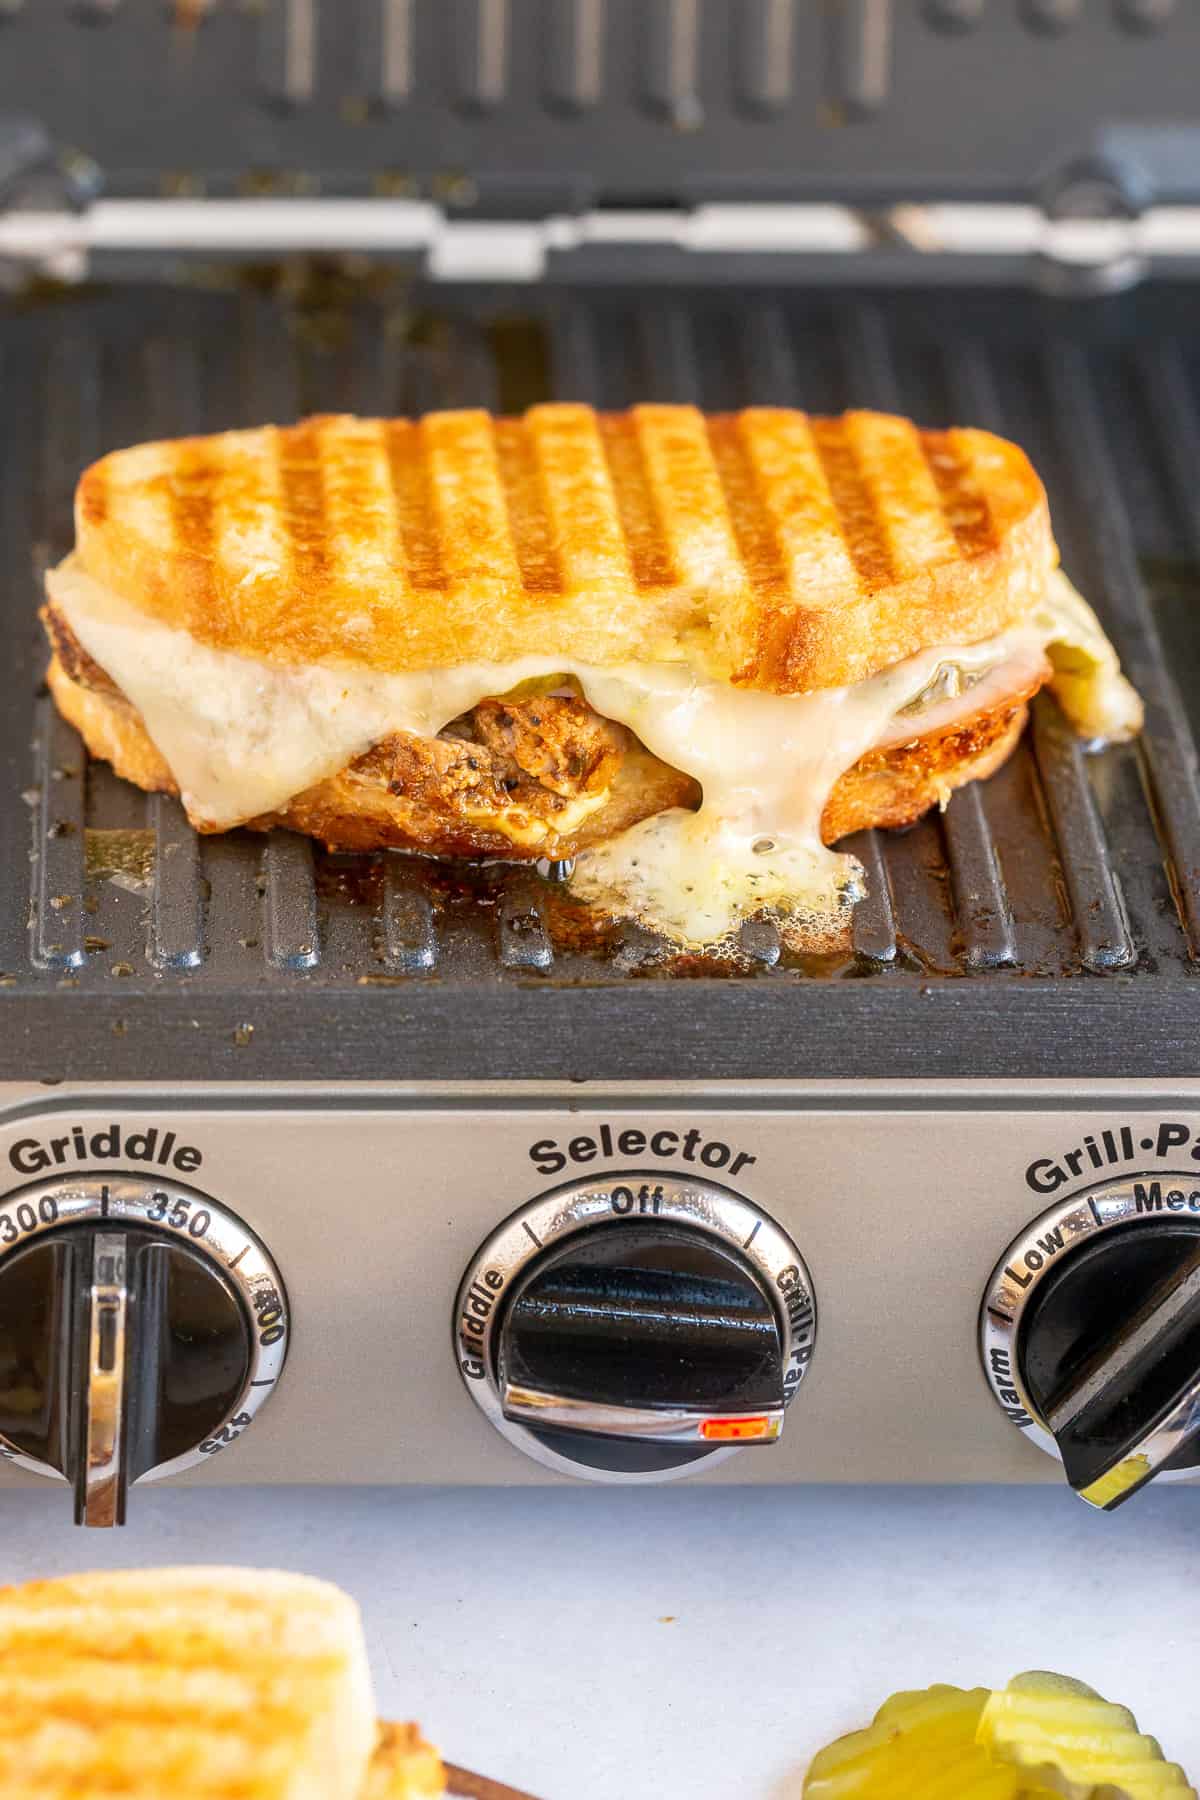 A cuban sandwich being cooked on a panini press.